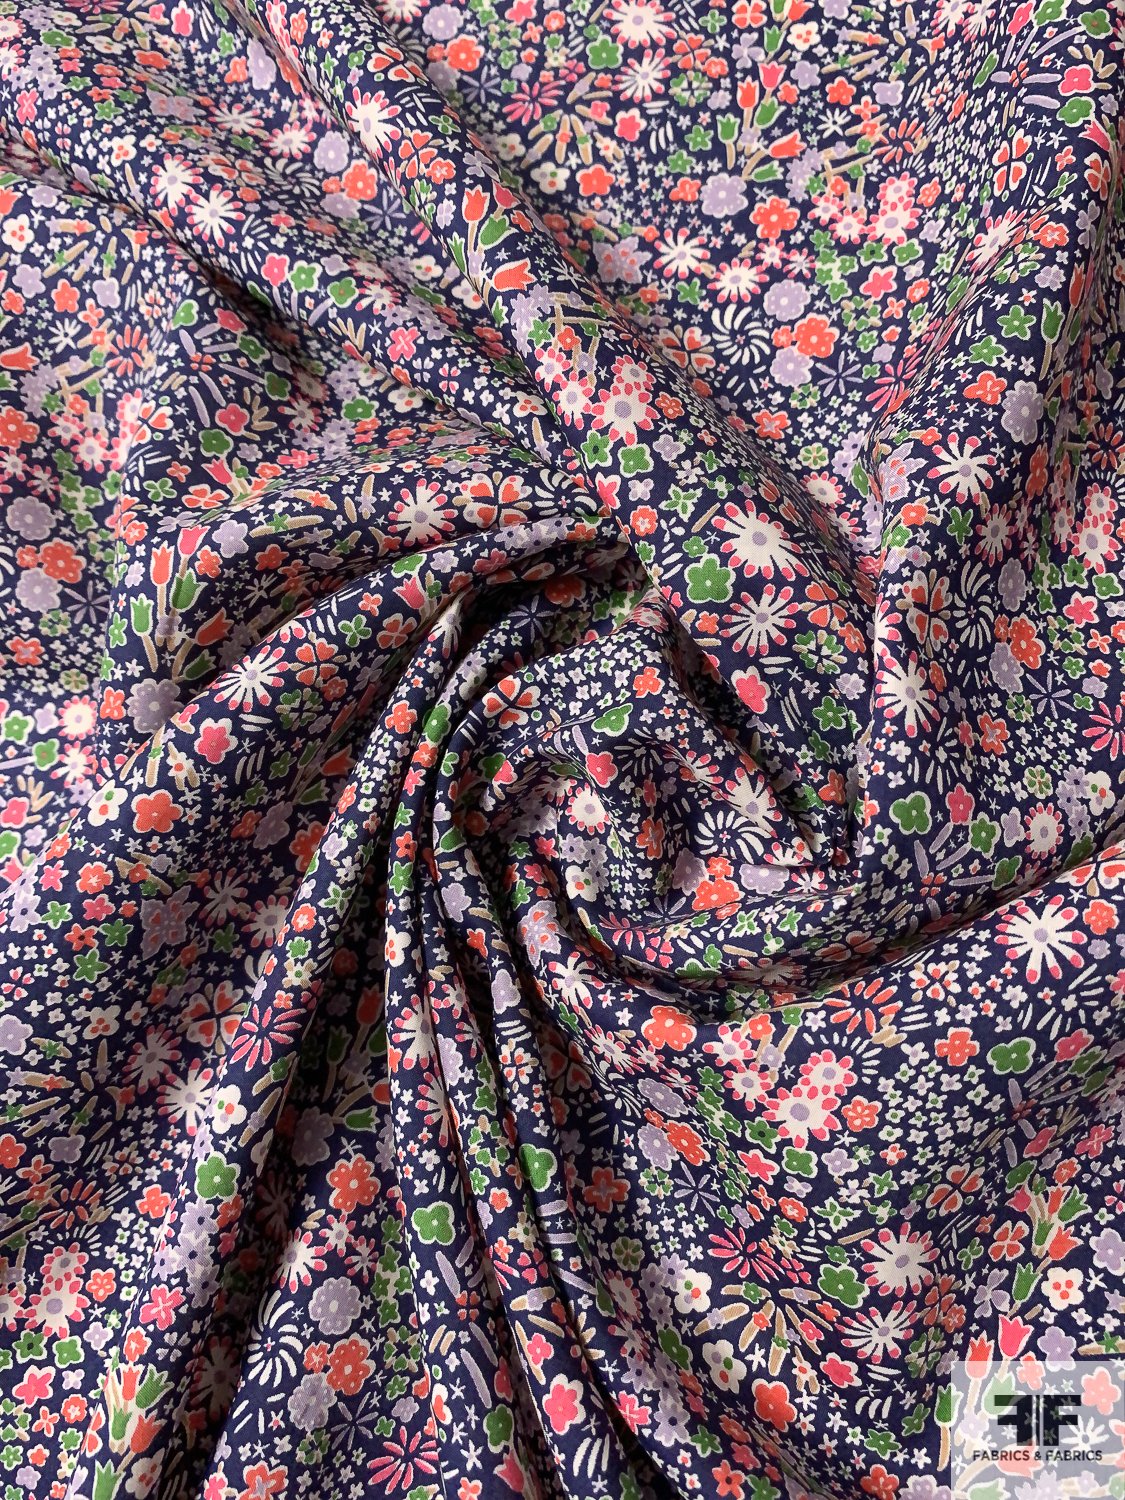 Liberty of London Ditsy Floral Printed Cotton Lawn - Navy